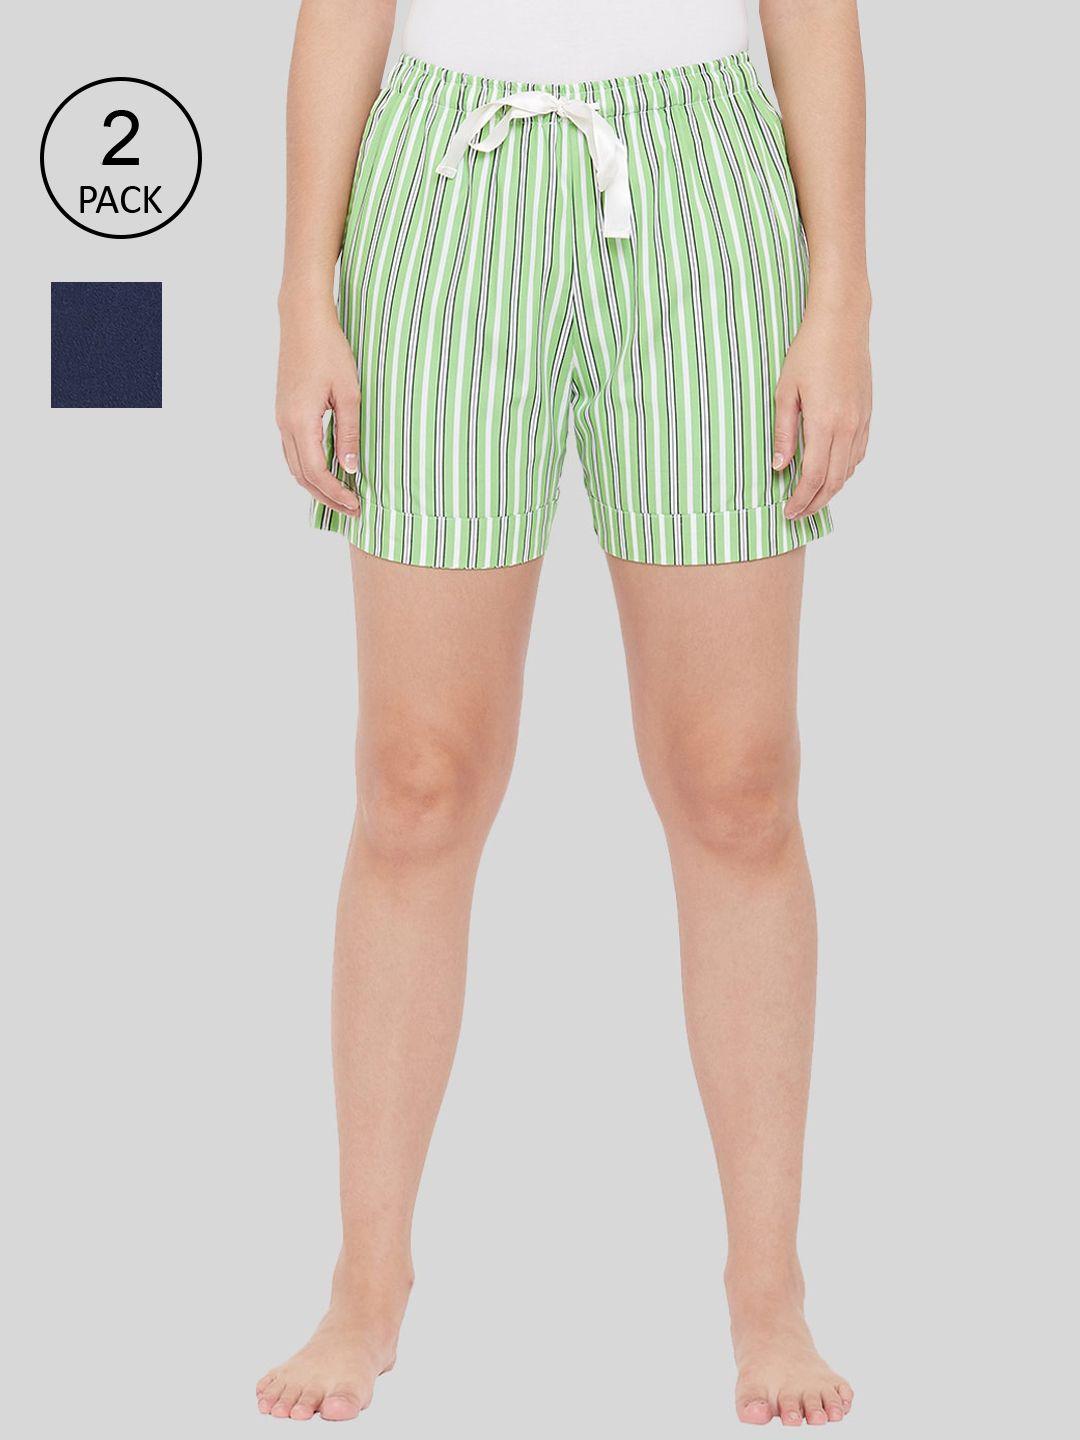 style shoes women green & blue striped shorts pack of 2